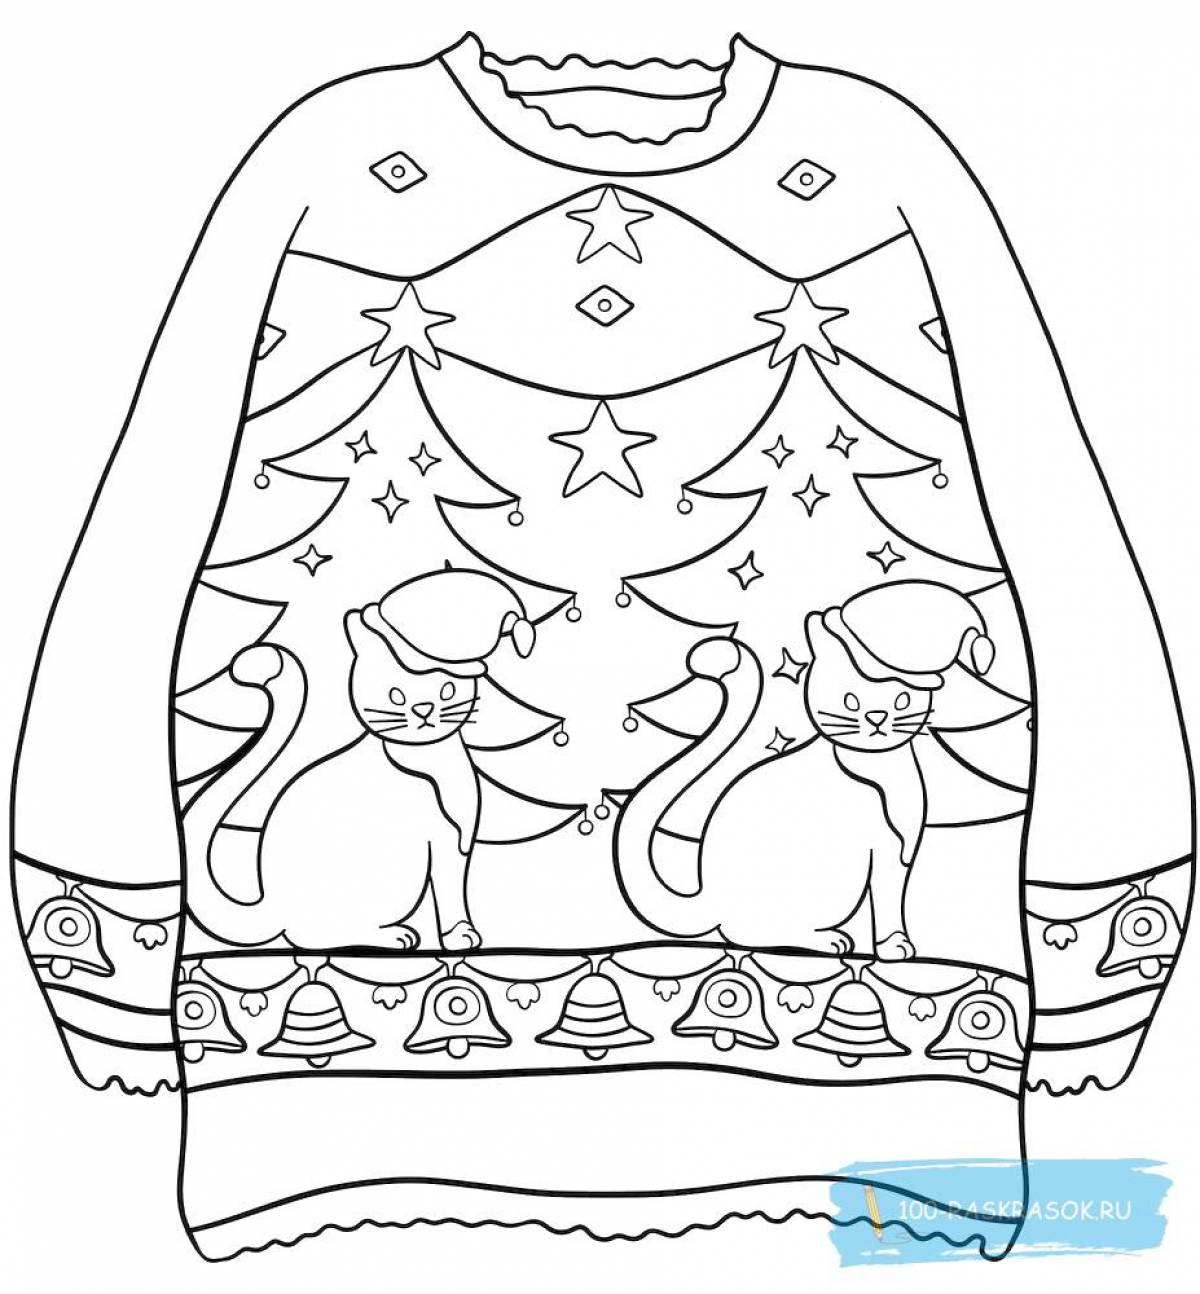 Sweater live coloring page